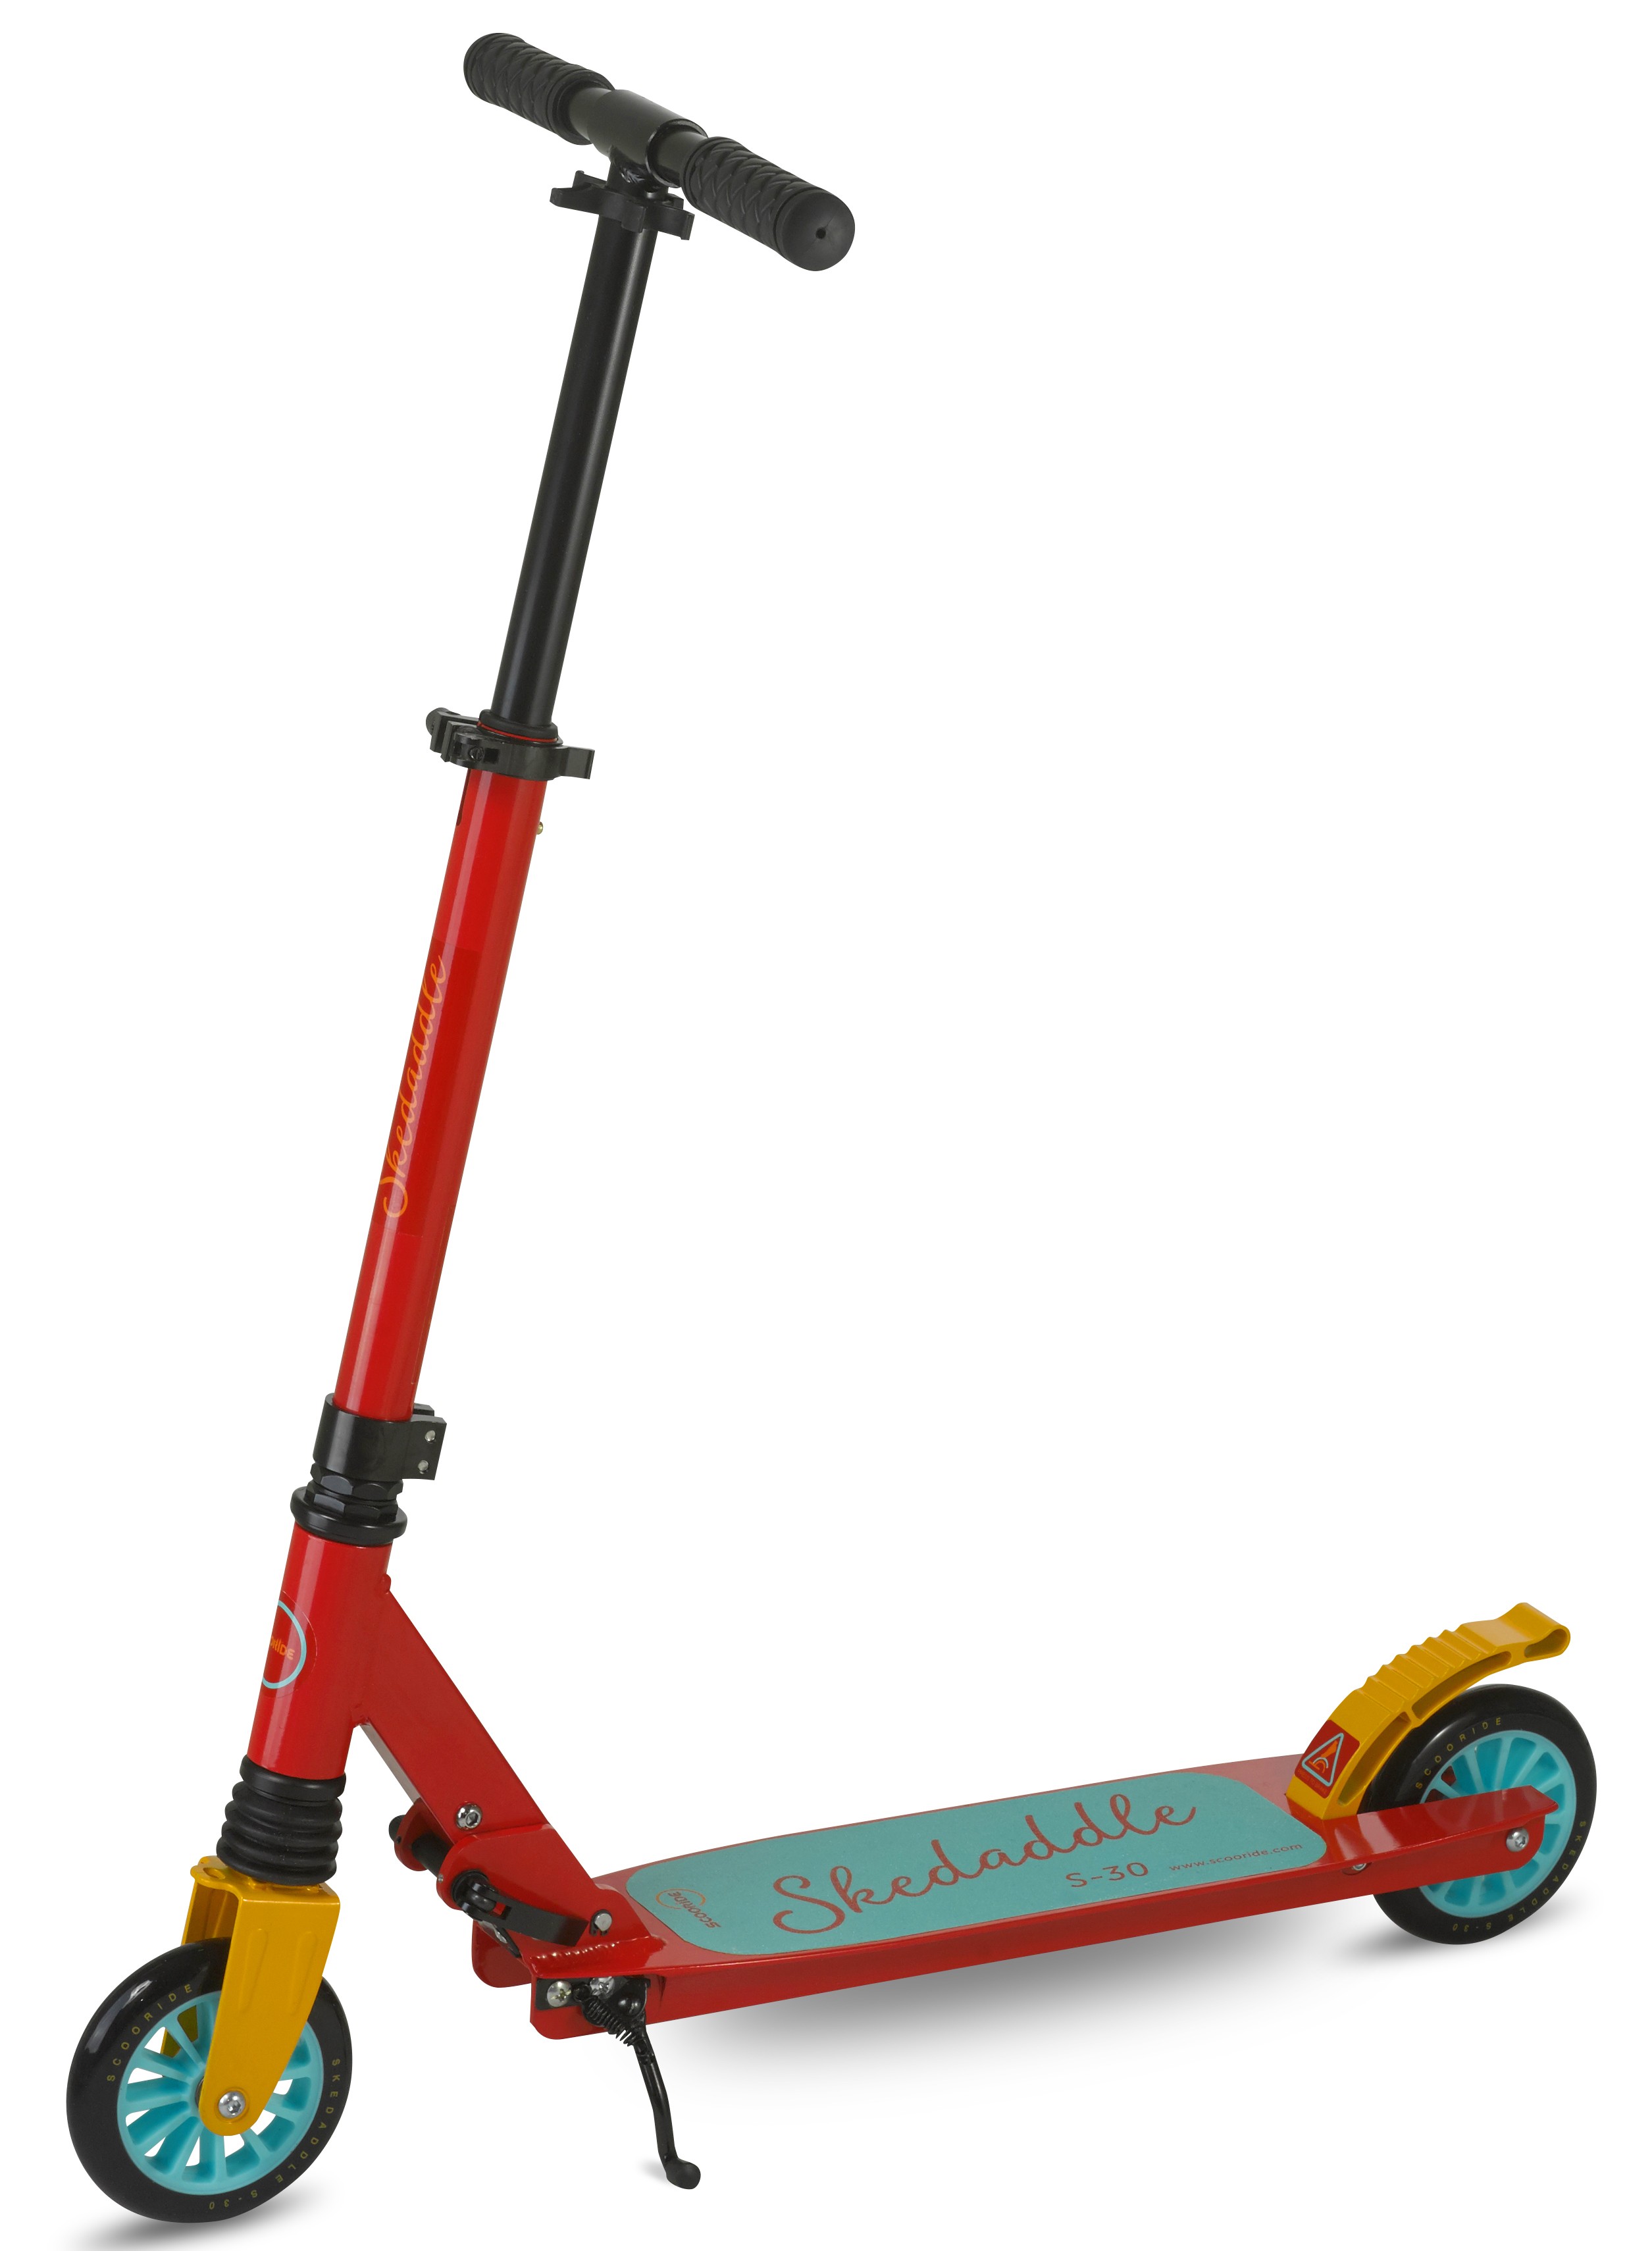 Scooride Skedaddle S-30 Kids Folding Kick Scooter | Foldable & Portable Stunt Push Scooter for Boys and Girls - Red